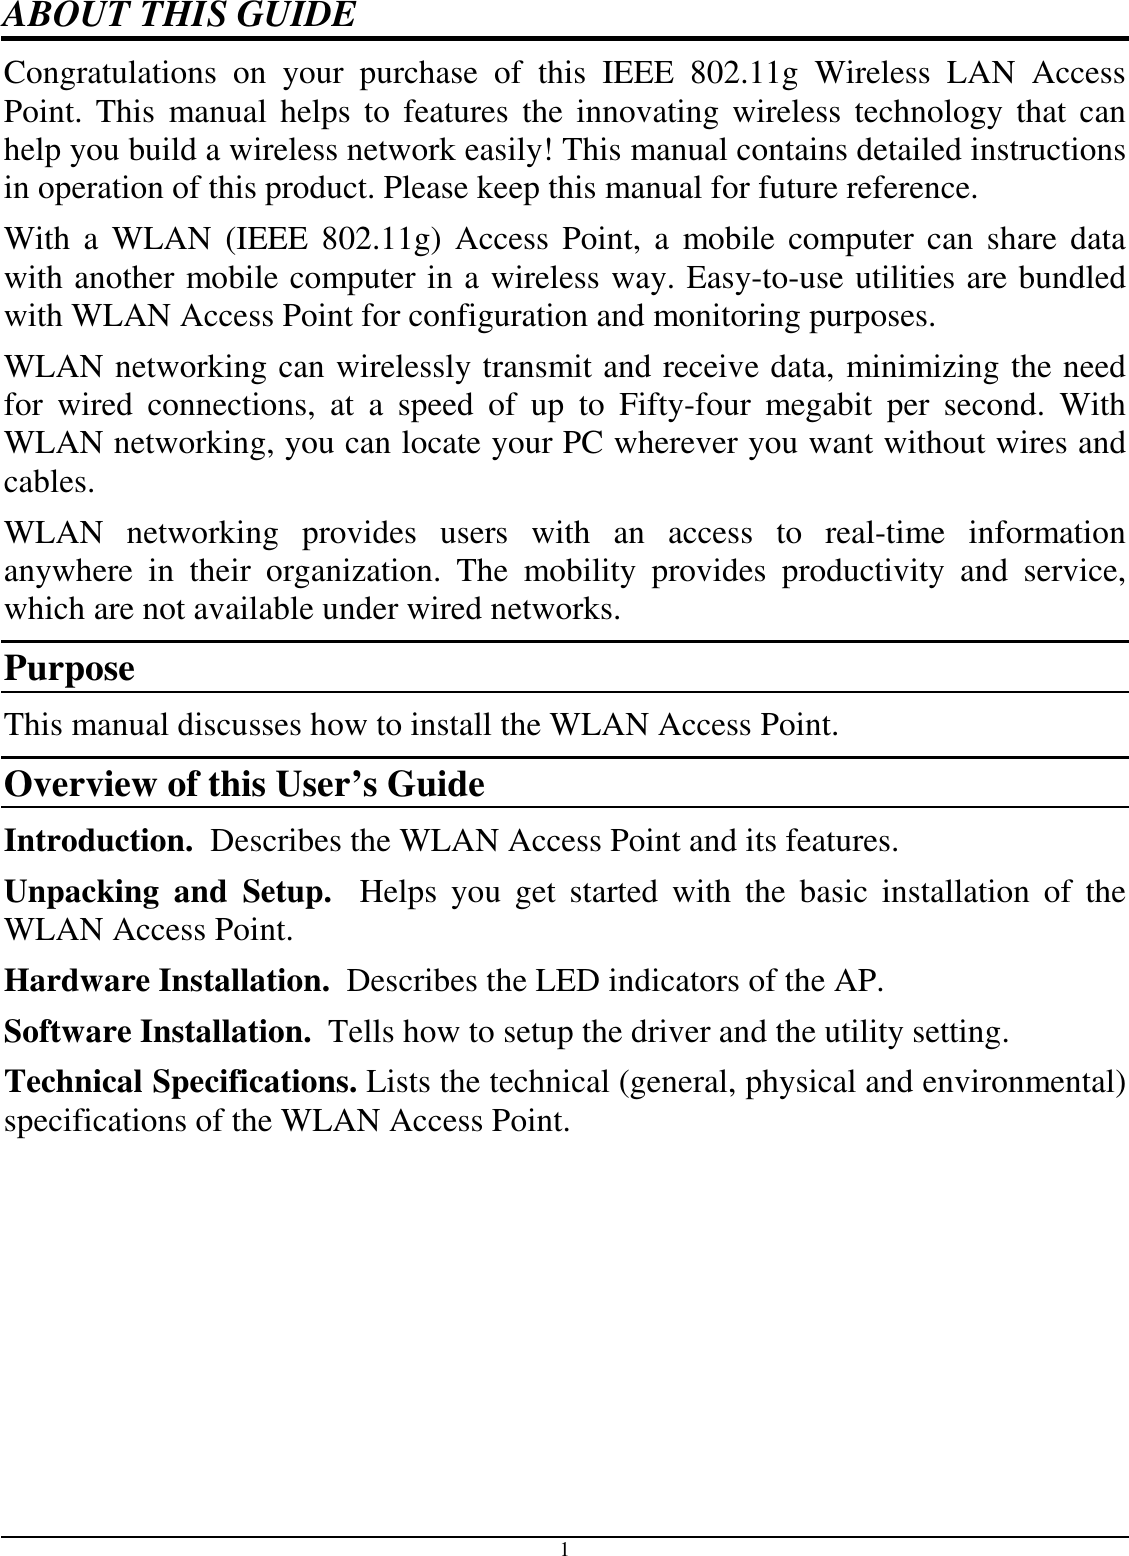 1 ABOUT THIS GUIDE Congratulations  on  your  purchase  of  this  IEEE  802.11g  Wireless  LAN  Access Point.  This  manual helps  to features  the  innovating  wireless  technology  that can help you build a wireless network easily! This manual contains detailed instructions in operation of this product. Please keep this manual for future reference. With a  WLAN  (IEEE  802.11g) Access  Point, a  mobile  computer can share data with another mobile computer in a wireless way. Easy-to-use utilities are bundled with WLAN Access Point for configuration and monitoring purposes.  WLAN networking can wirelessly transmit and receive data, minimizing the need for  wired  connections,  at  a  speed  of  up  to  Fifty-four  megabit  per  second.  With WLAN networking, you can locate your PC wherever you want without wires and cables. WLAN  networking  provides  users  with  an  access  to  real-time  information anywhere  in  their  organization.  The  mobility  provides  productivity  and  service, which are not available under wired networks.  Purpose This manual discusses how to install the WLAN Access Point.  Overview of this User’s Guide Introduction.  Describes the WLAN Access Point and its features. Unpacking  and  Setup.    Helps  you  get  started  with  the  basic  installation  of  the WLAN Access Point. Hardware Installation.  Describes the LED indicators of the AP. Software Installation.  Tells how to setup the driver and the utility setting. Technical Specifications. Lists the technical (general, physical and environmental) specifications of the WLAN Access Point. 